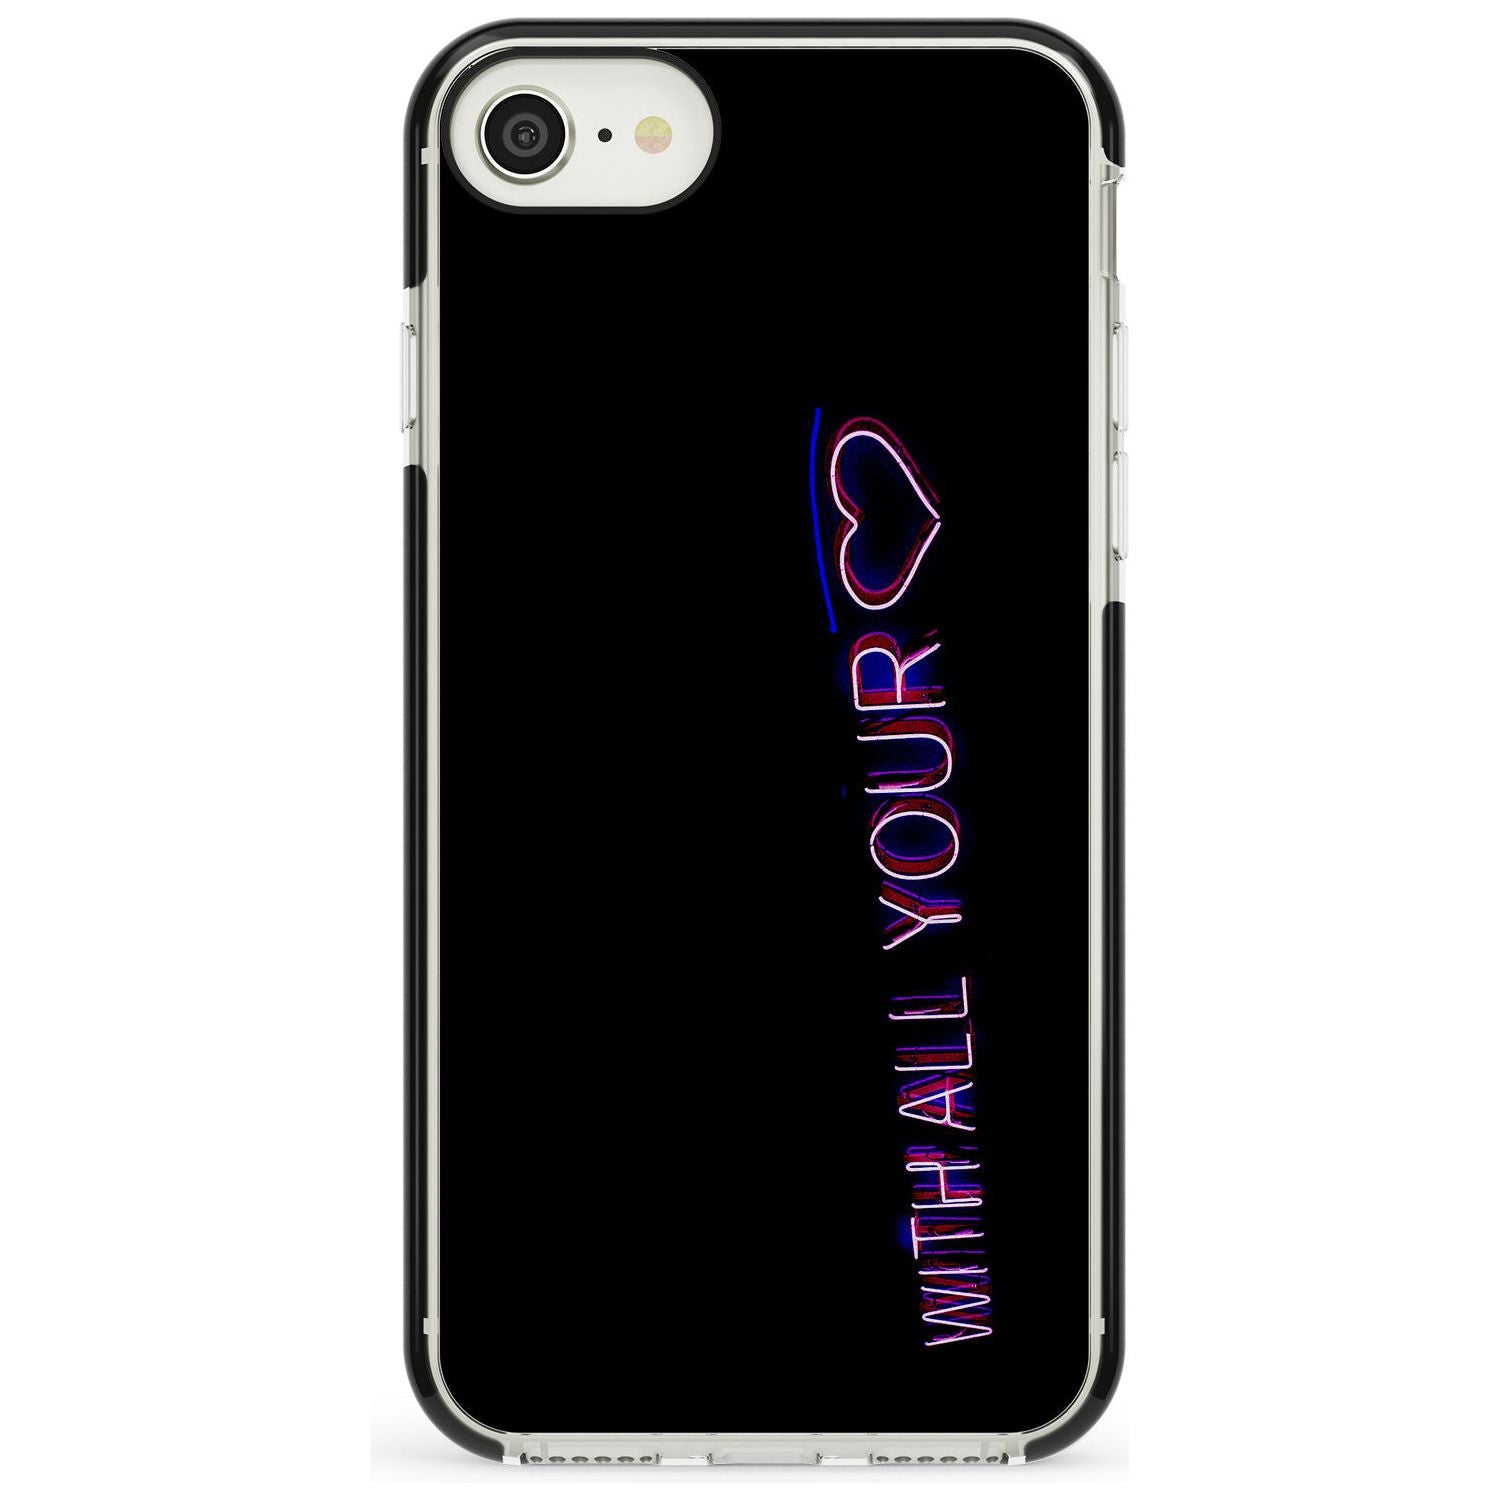 With All Your Heart Neon Sign Black Impact Phone Case for iPhone SE 8 7 Plus